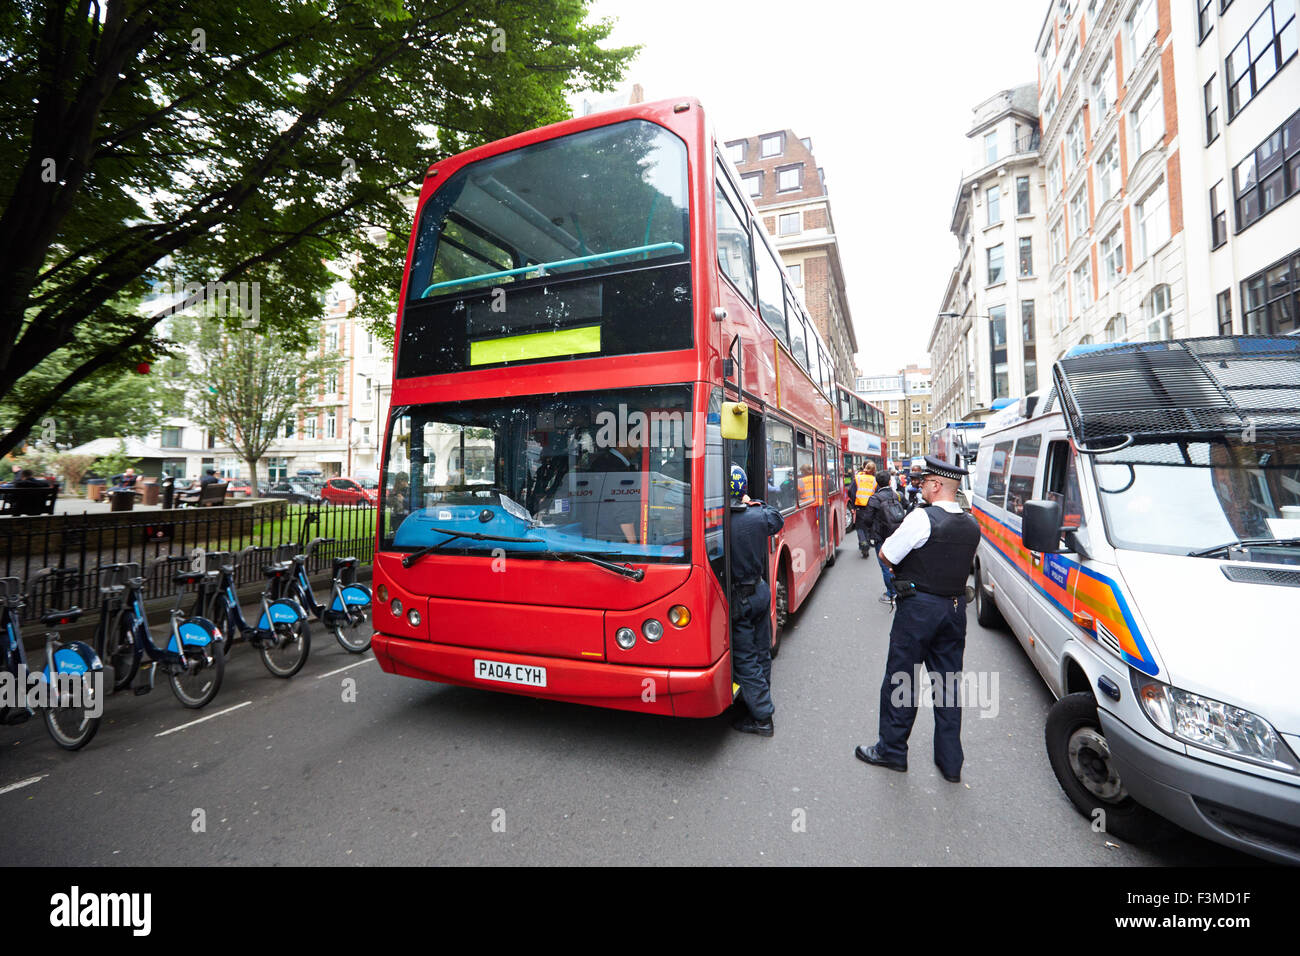 G8 Bus High Resolution Stock Photography and Images - Alamy